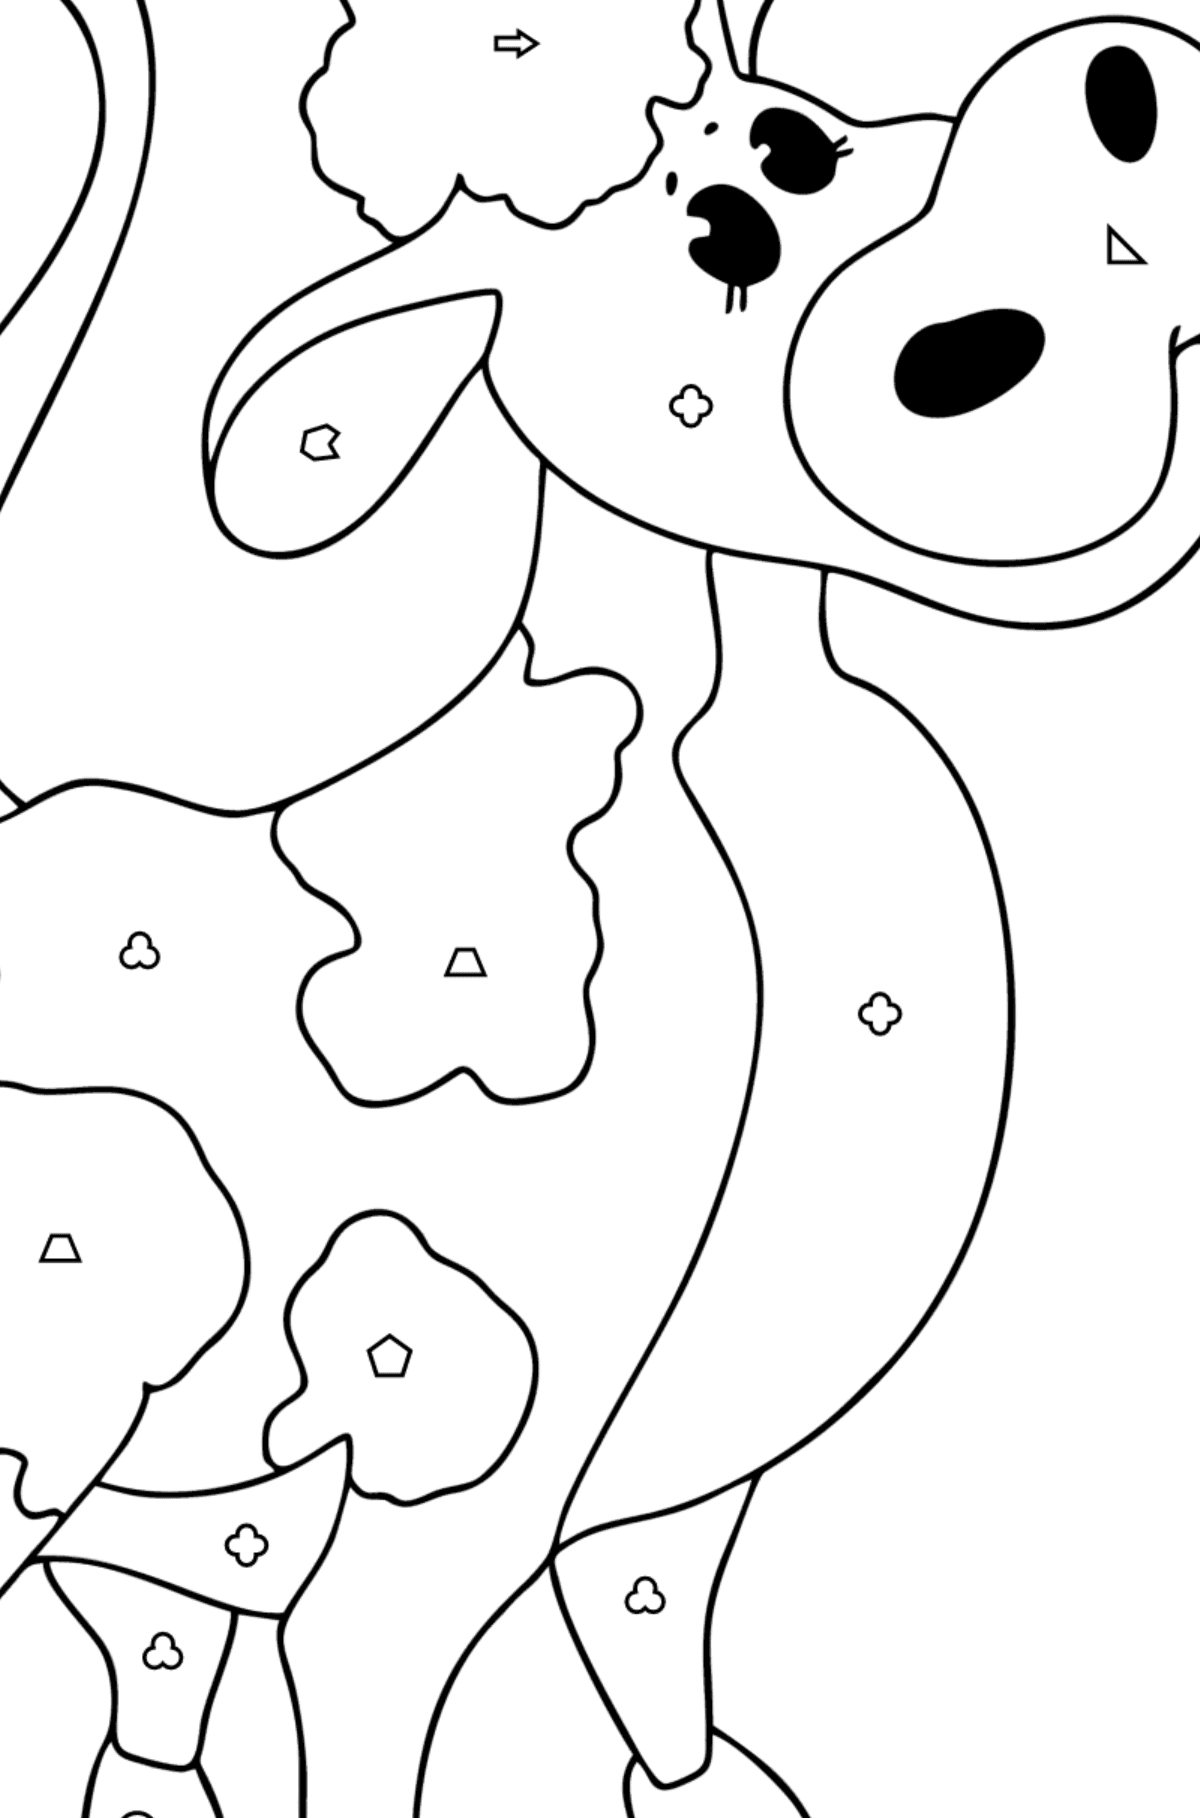 Baby cow coloring pages - Coloring by Geometric Shapes for Kids